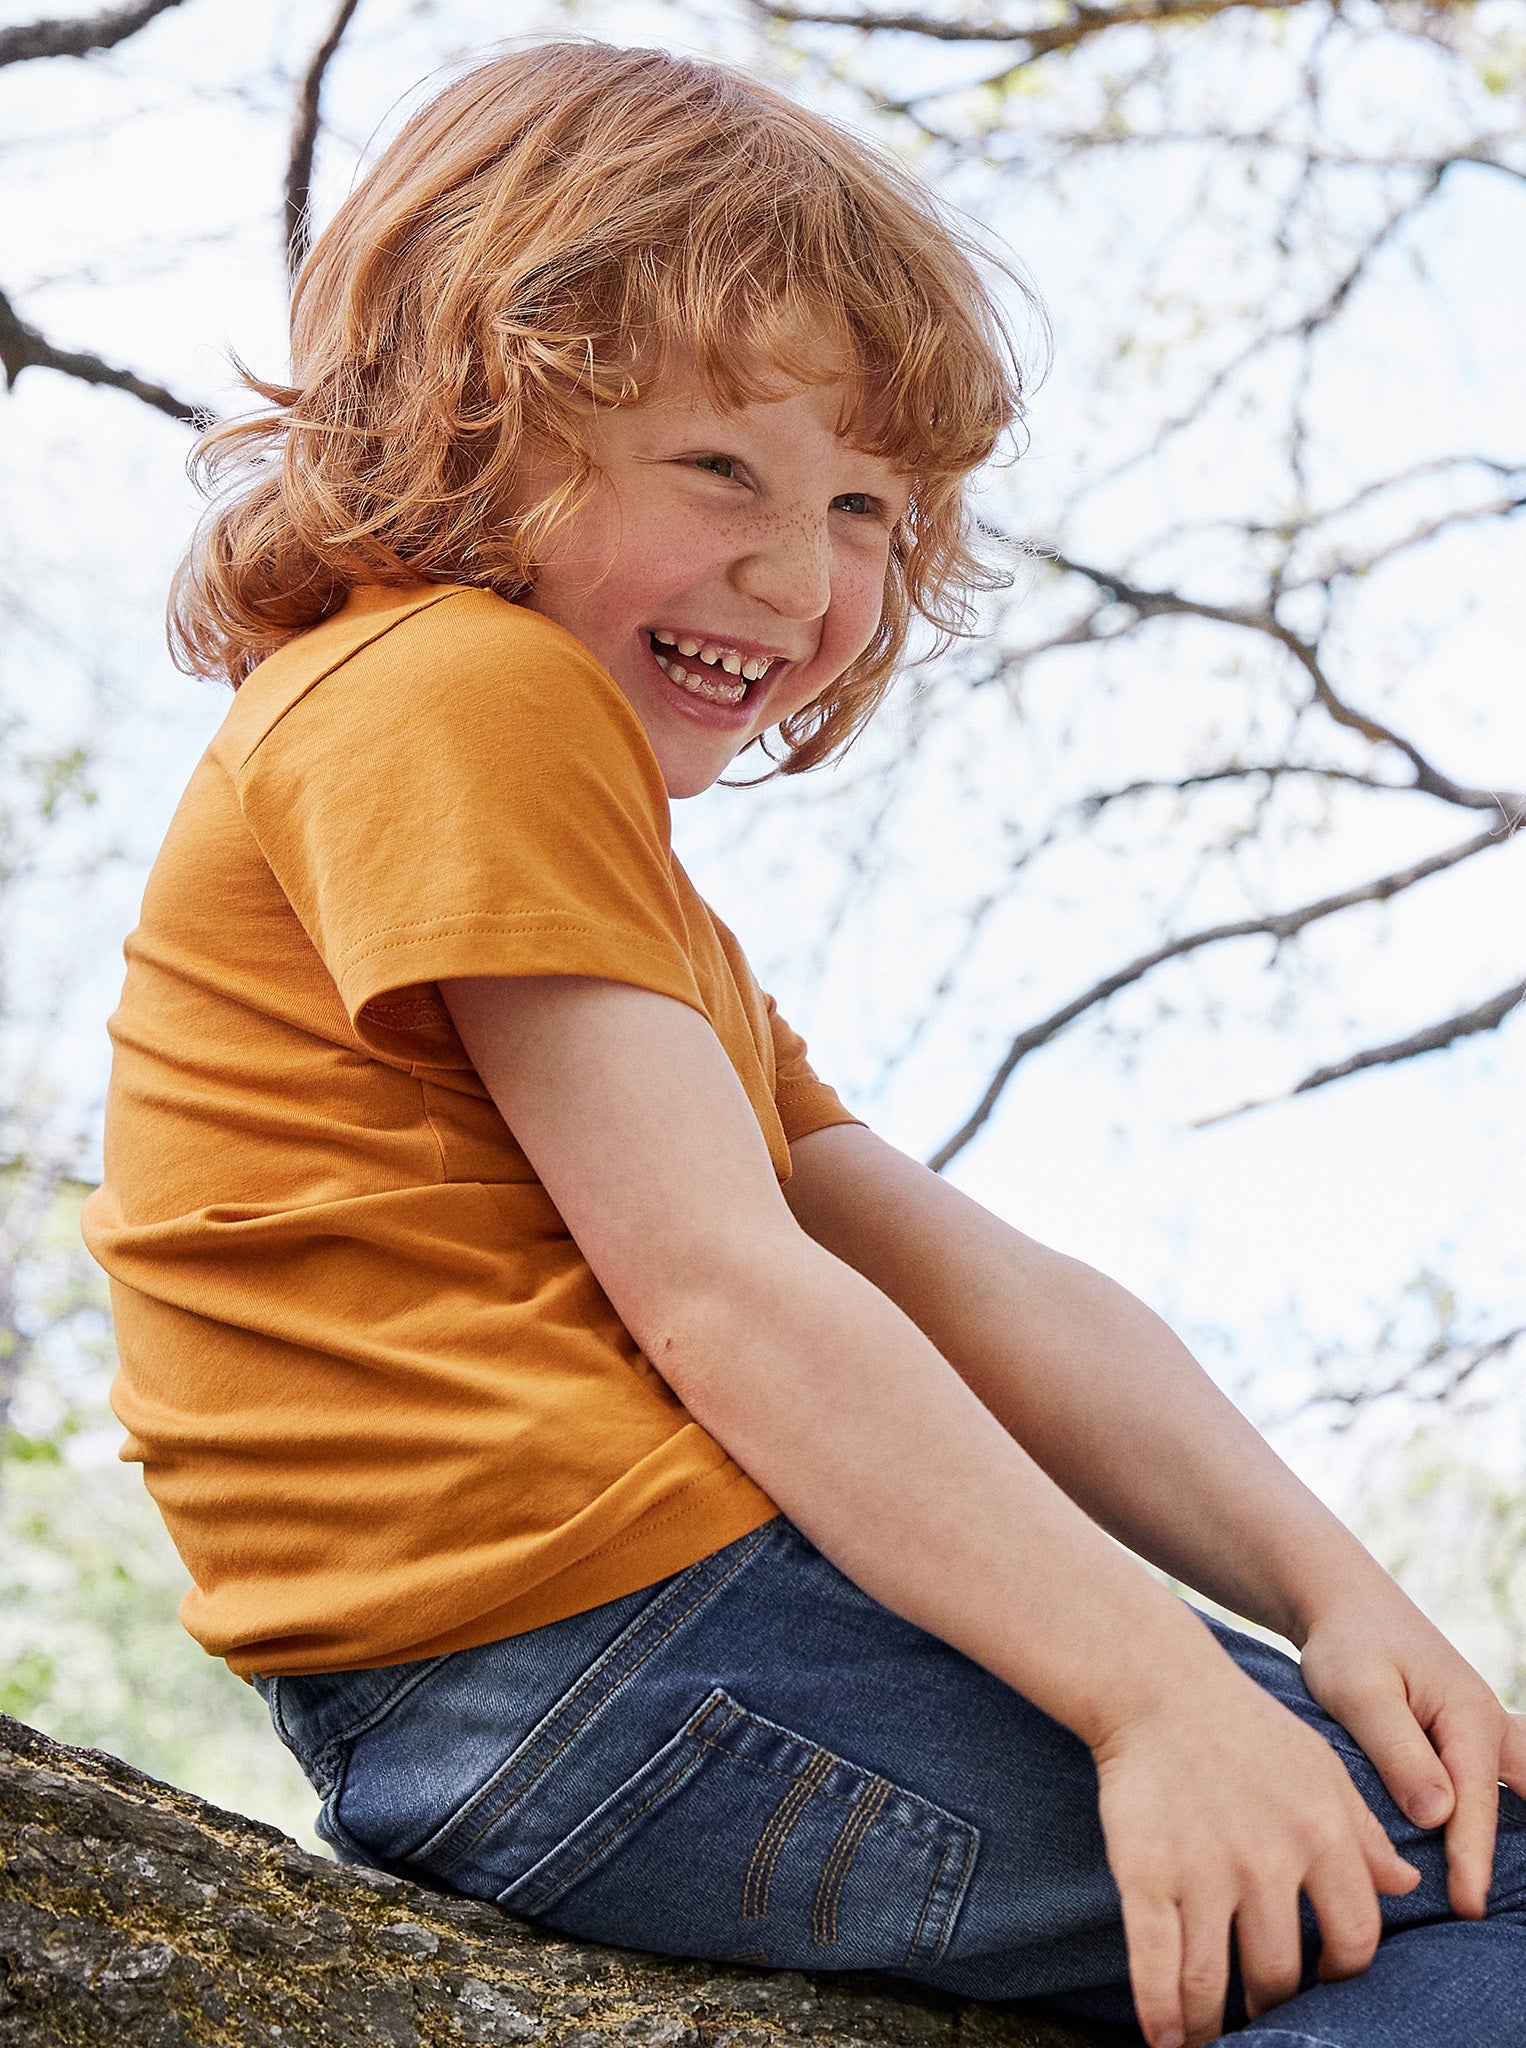 Organic Cotton Kids Orange T-Shirt from the Polarn O. Pyret Kidswear collection. Ethically produced kids clothing.